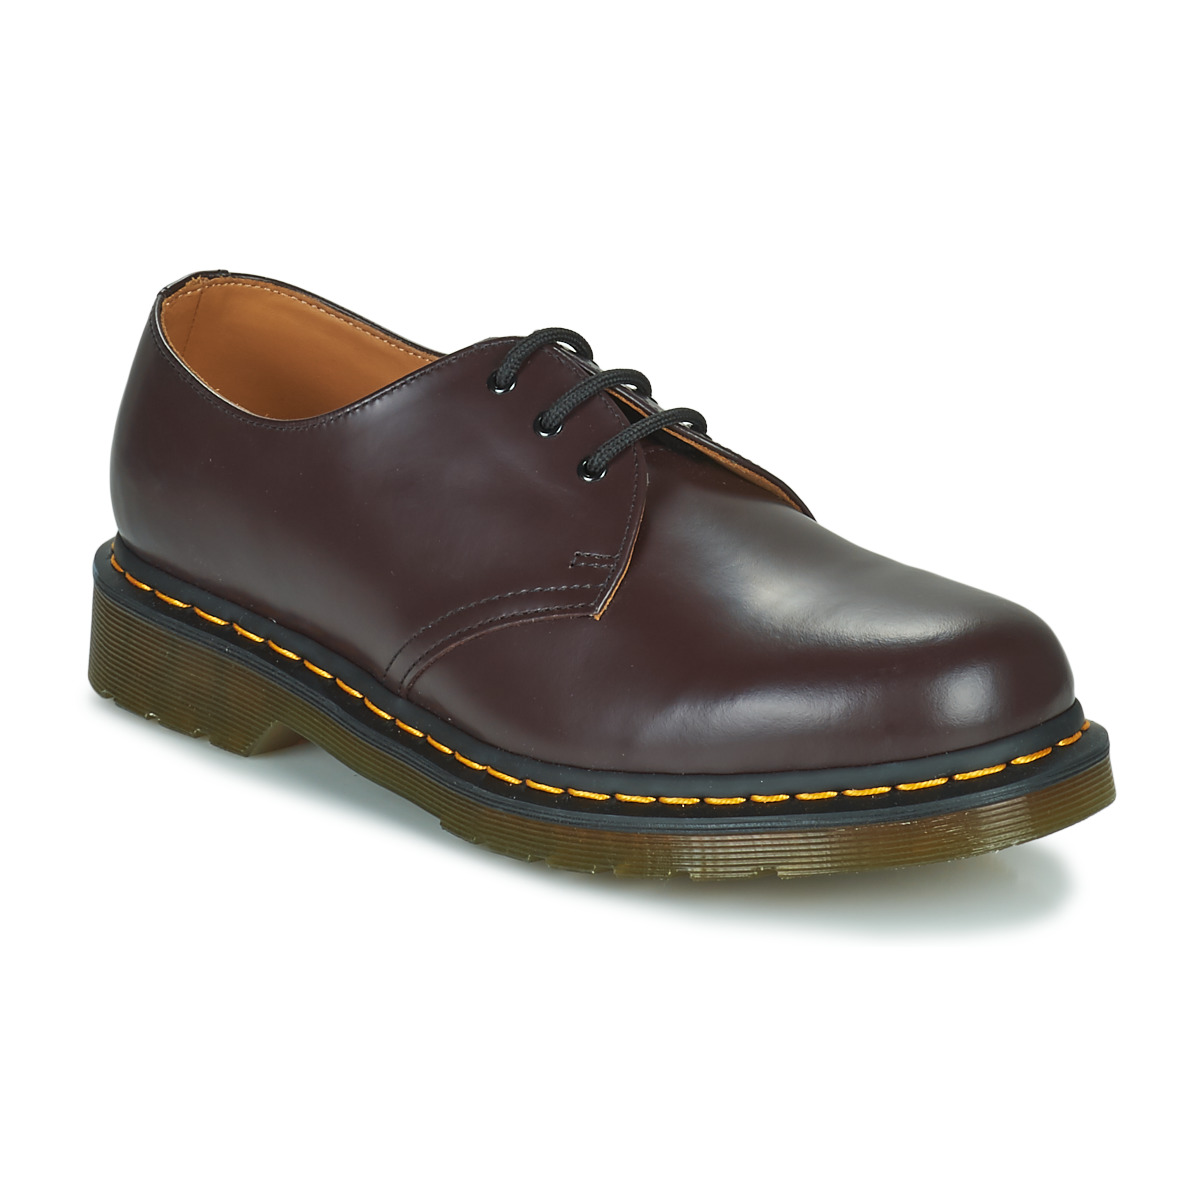 Chaussures Martens womens Chaussures oxford blanches 1461 HDW 1461 BURGUNDY SMOOTH Bordeaux